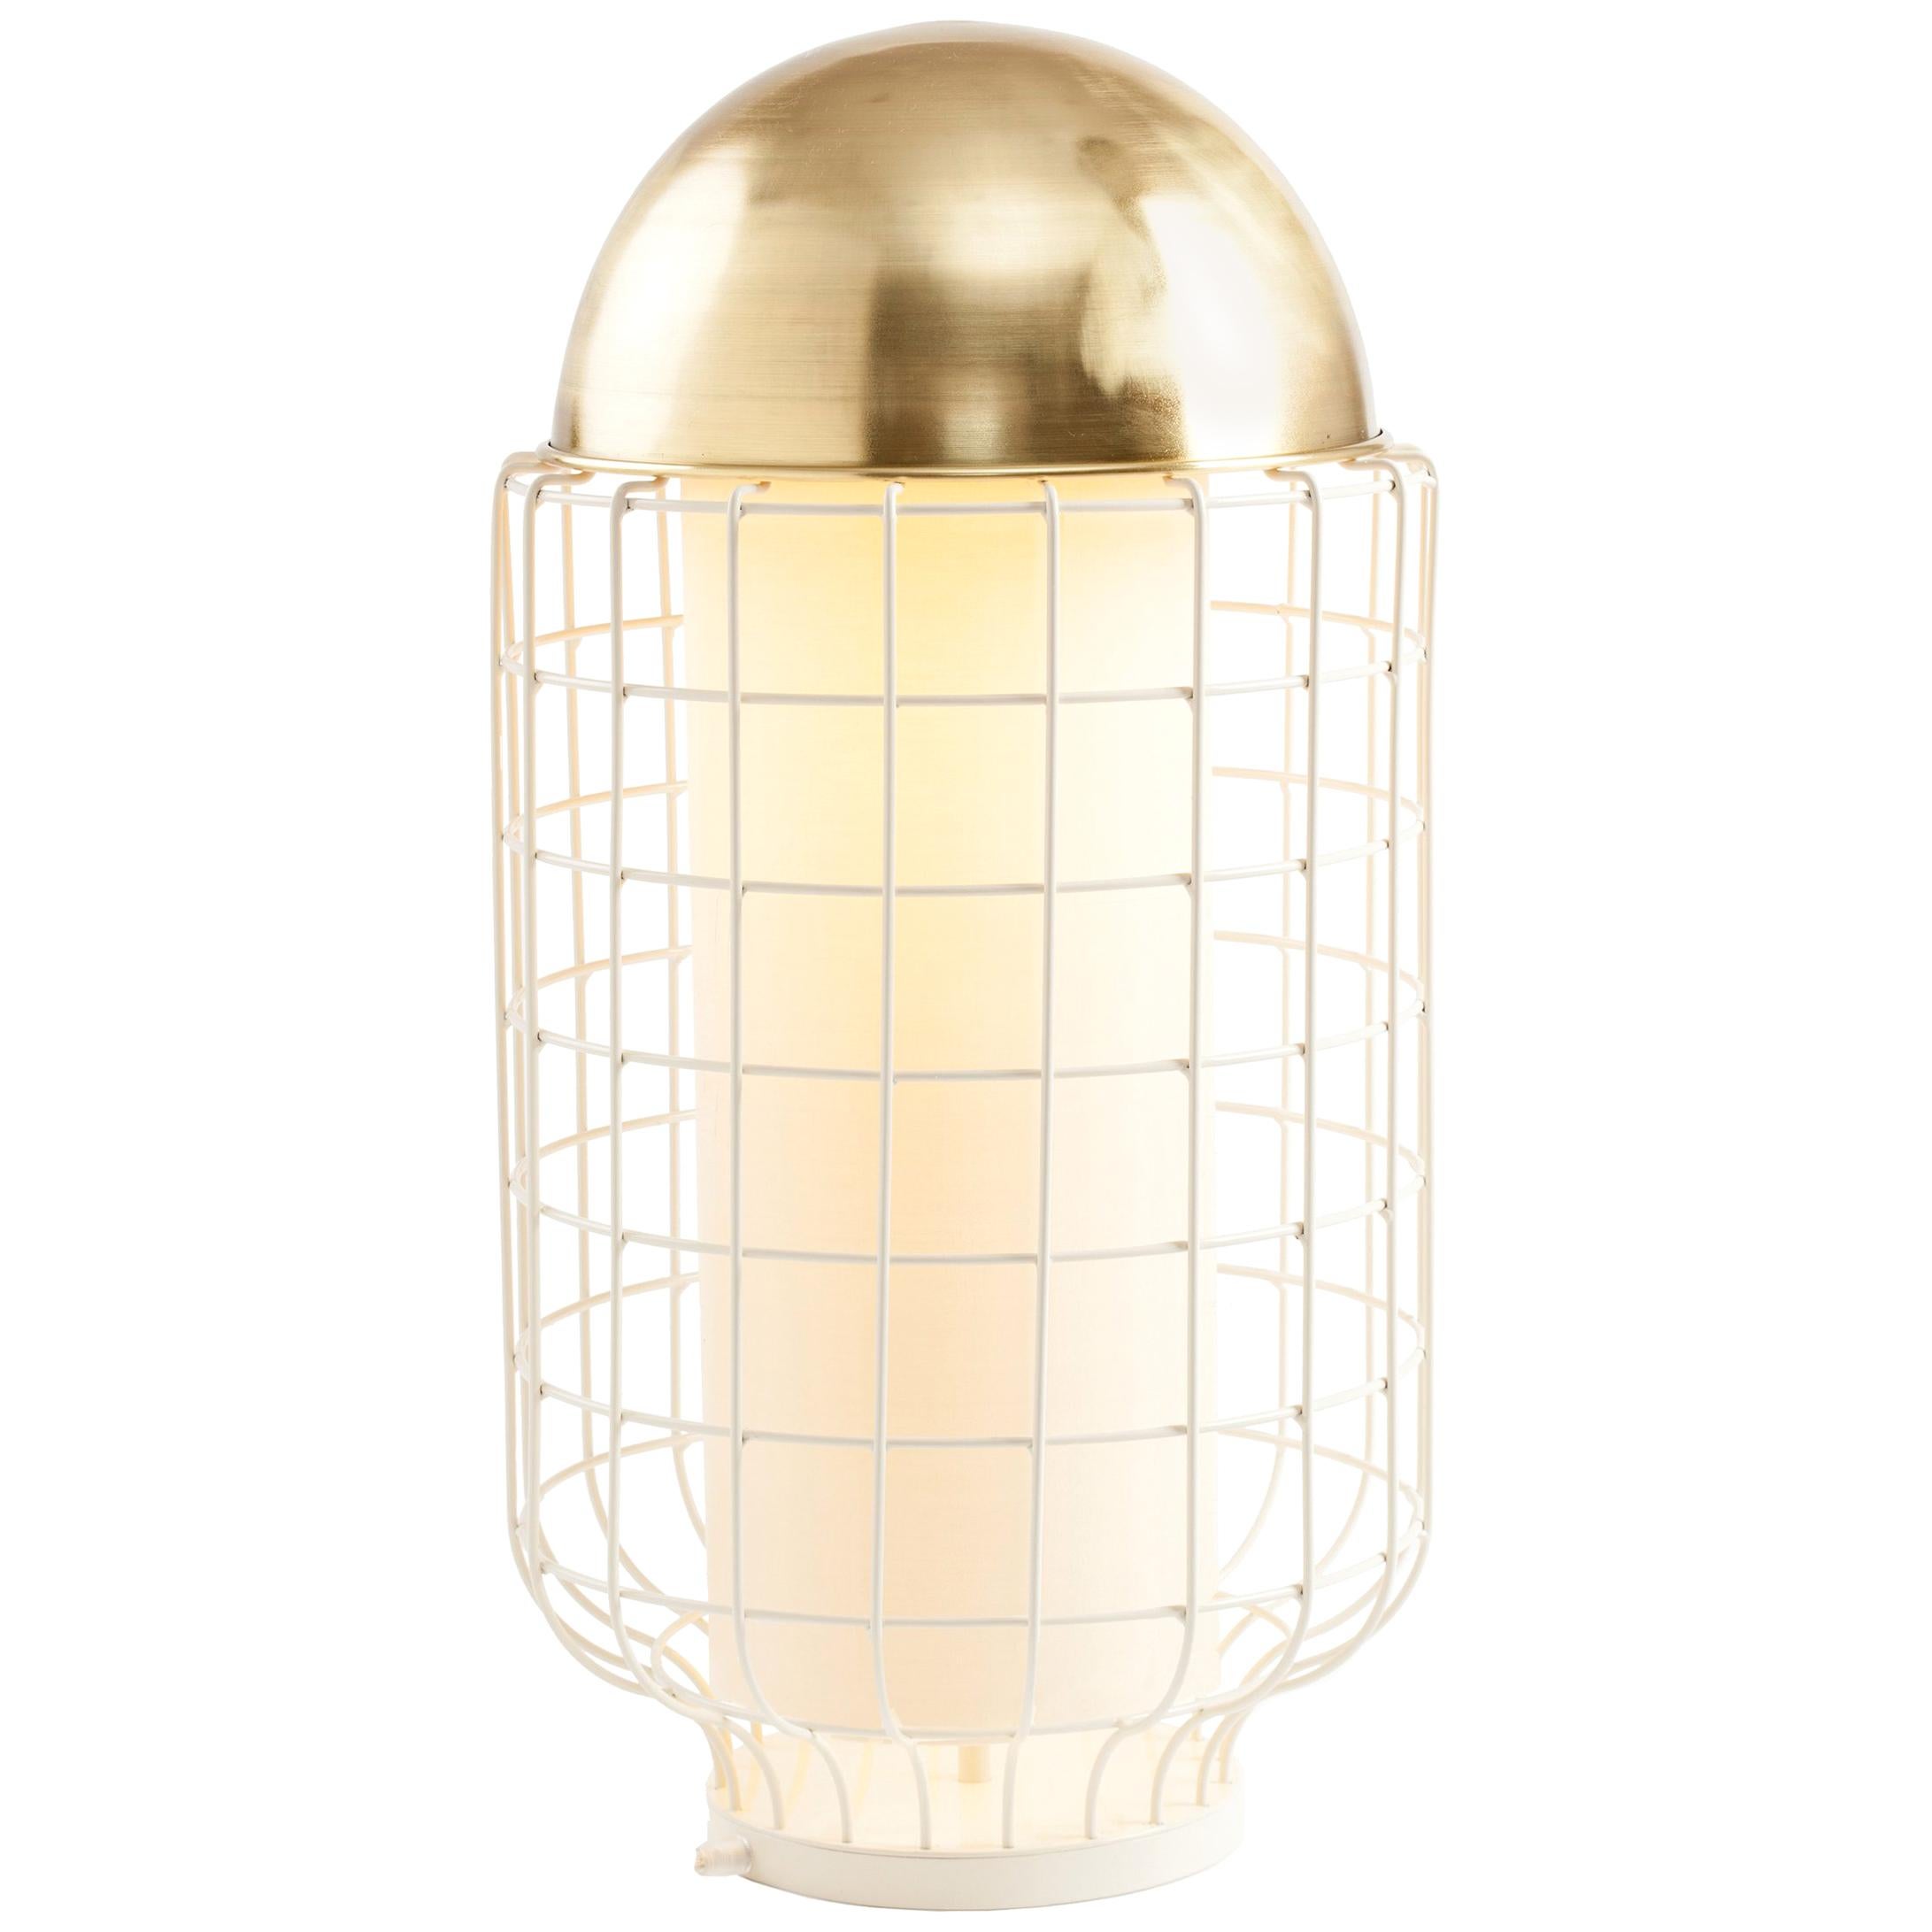 21st Century Art Deco Magnolia Table Lamp Ivory and Polished Brass For Sale